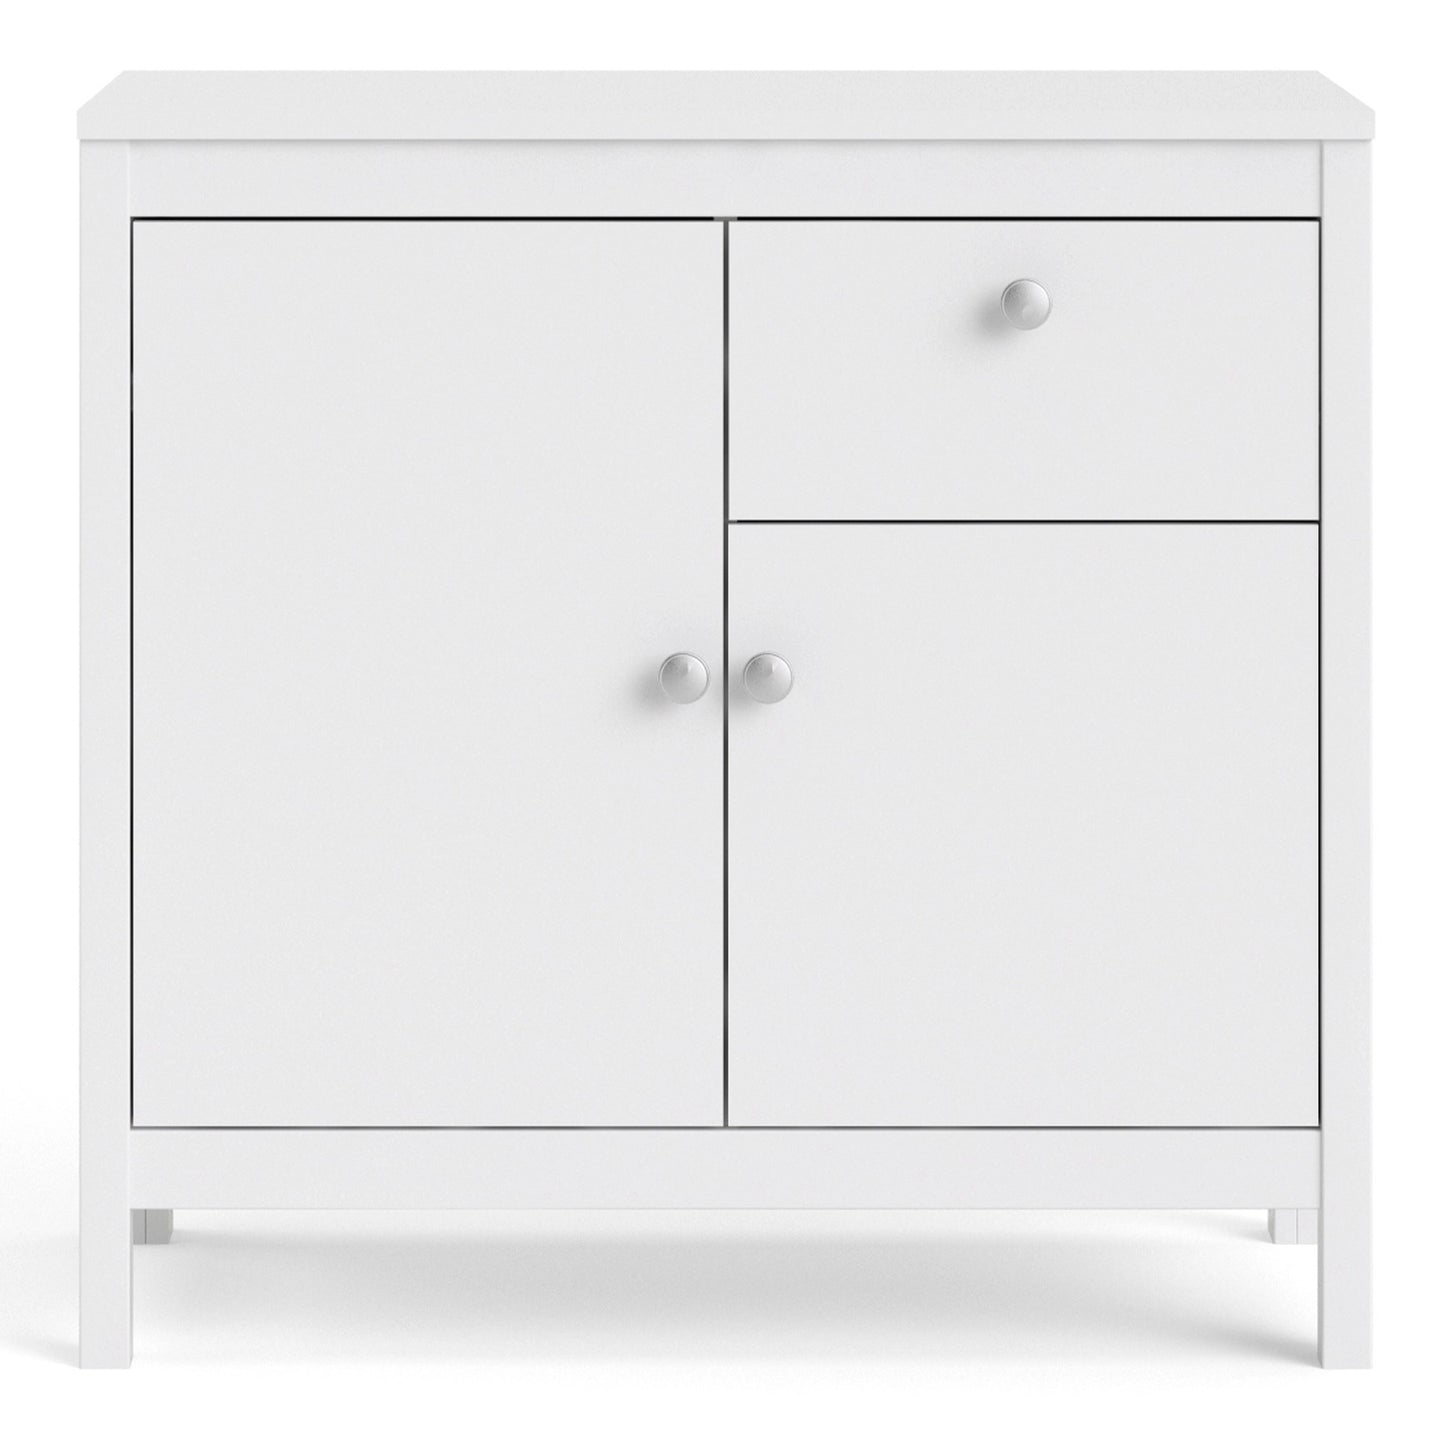 Furniture To Go Madrid Sideboard 2 Doors + 1 Drawer in White